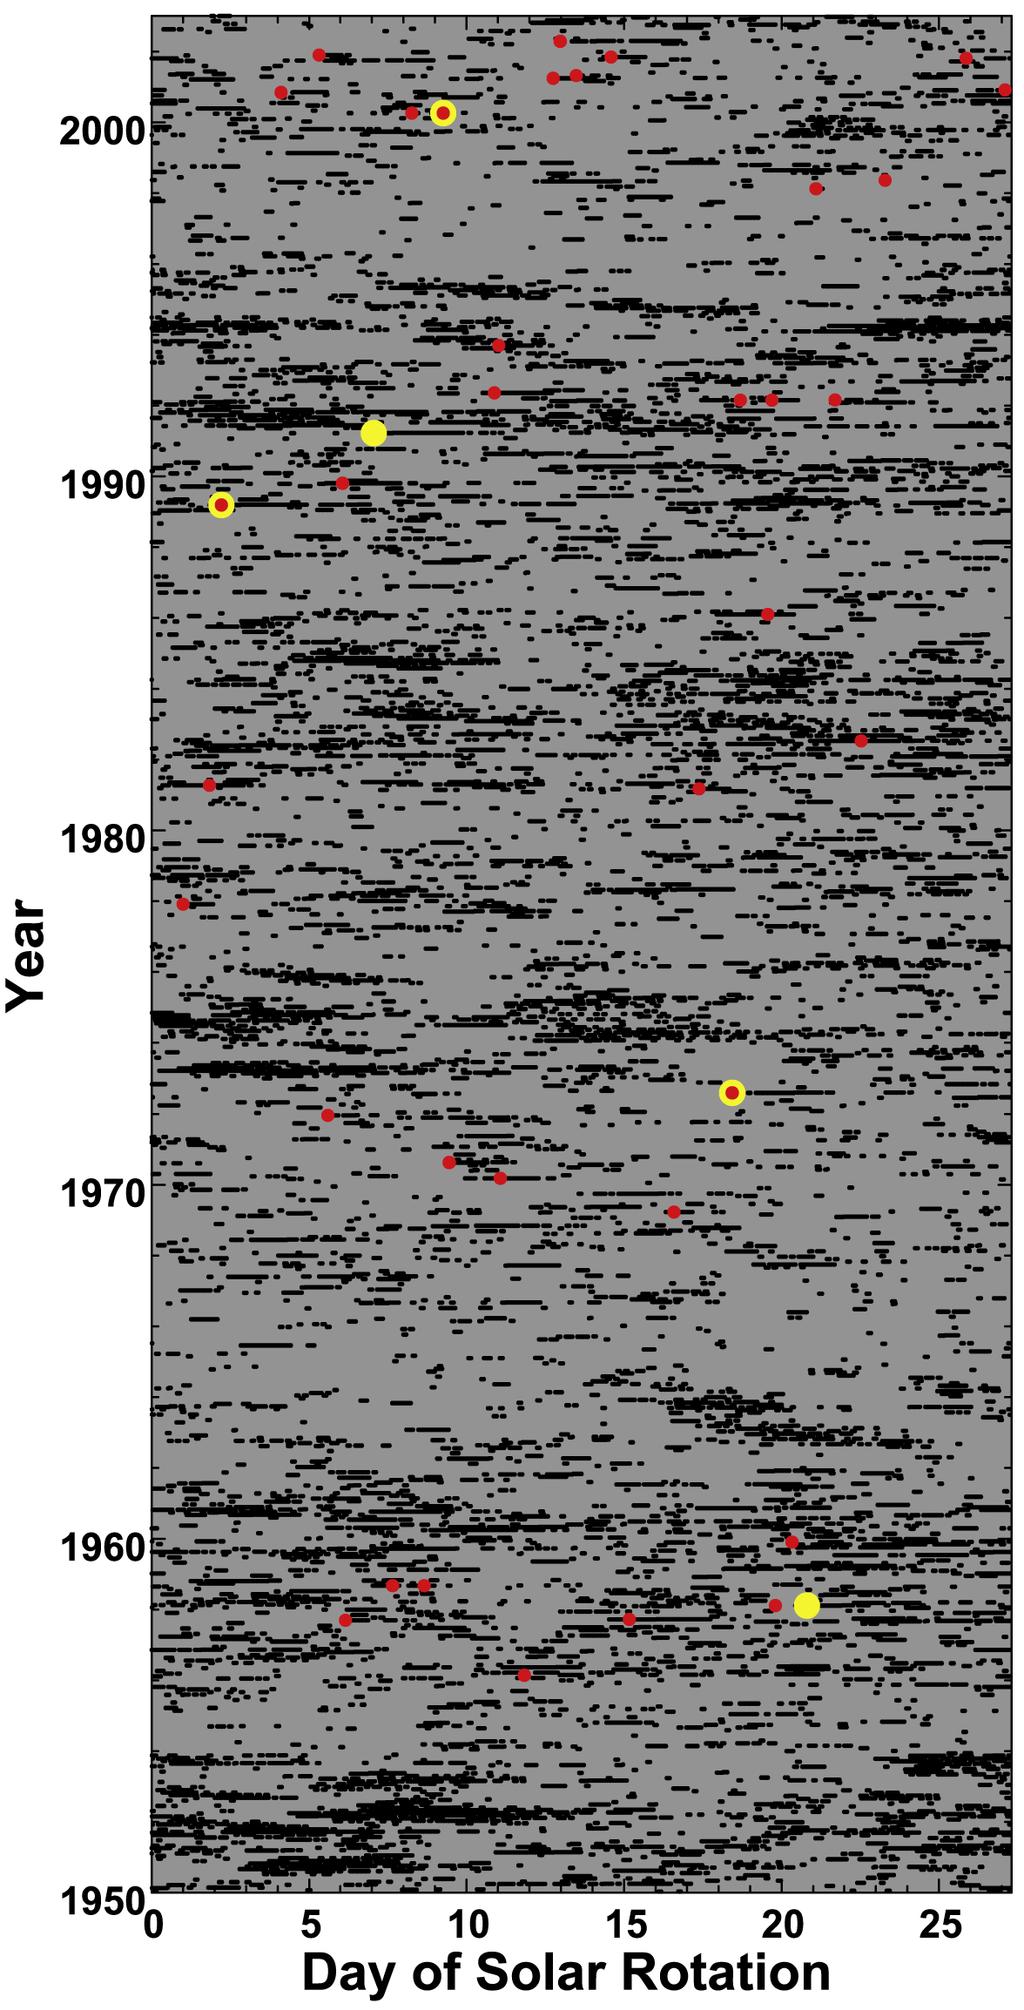 1989 2004 [Shiokawa et al., 2005], only one event occurred during the 1993 1995 era of recurring high-speed streams.